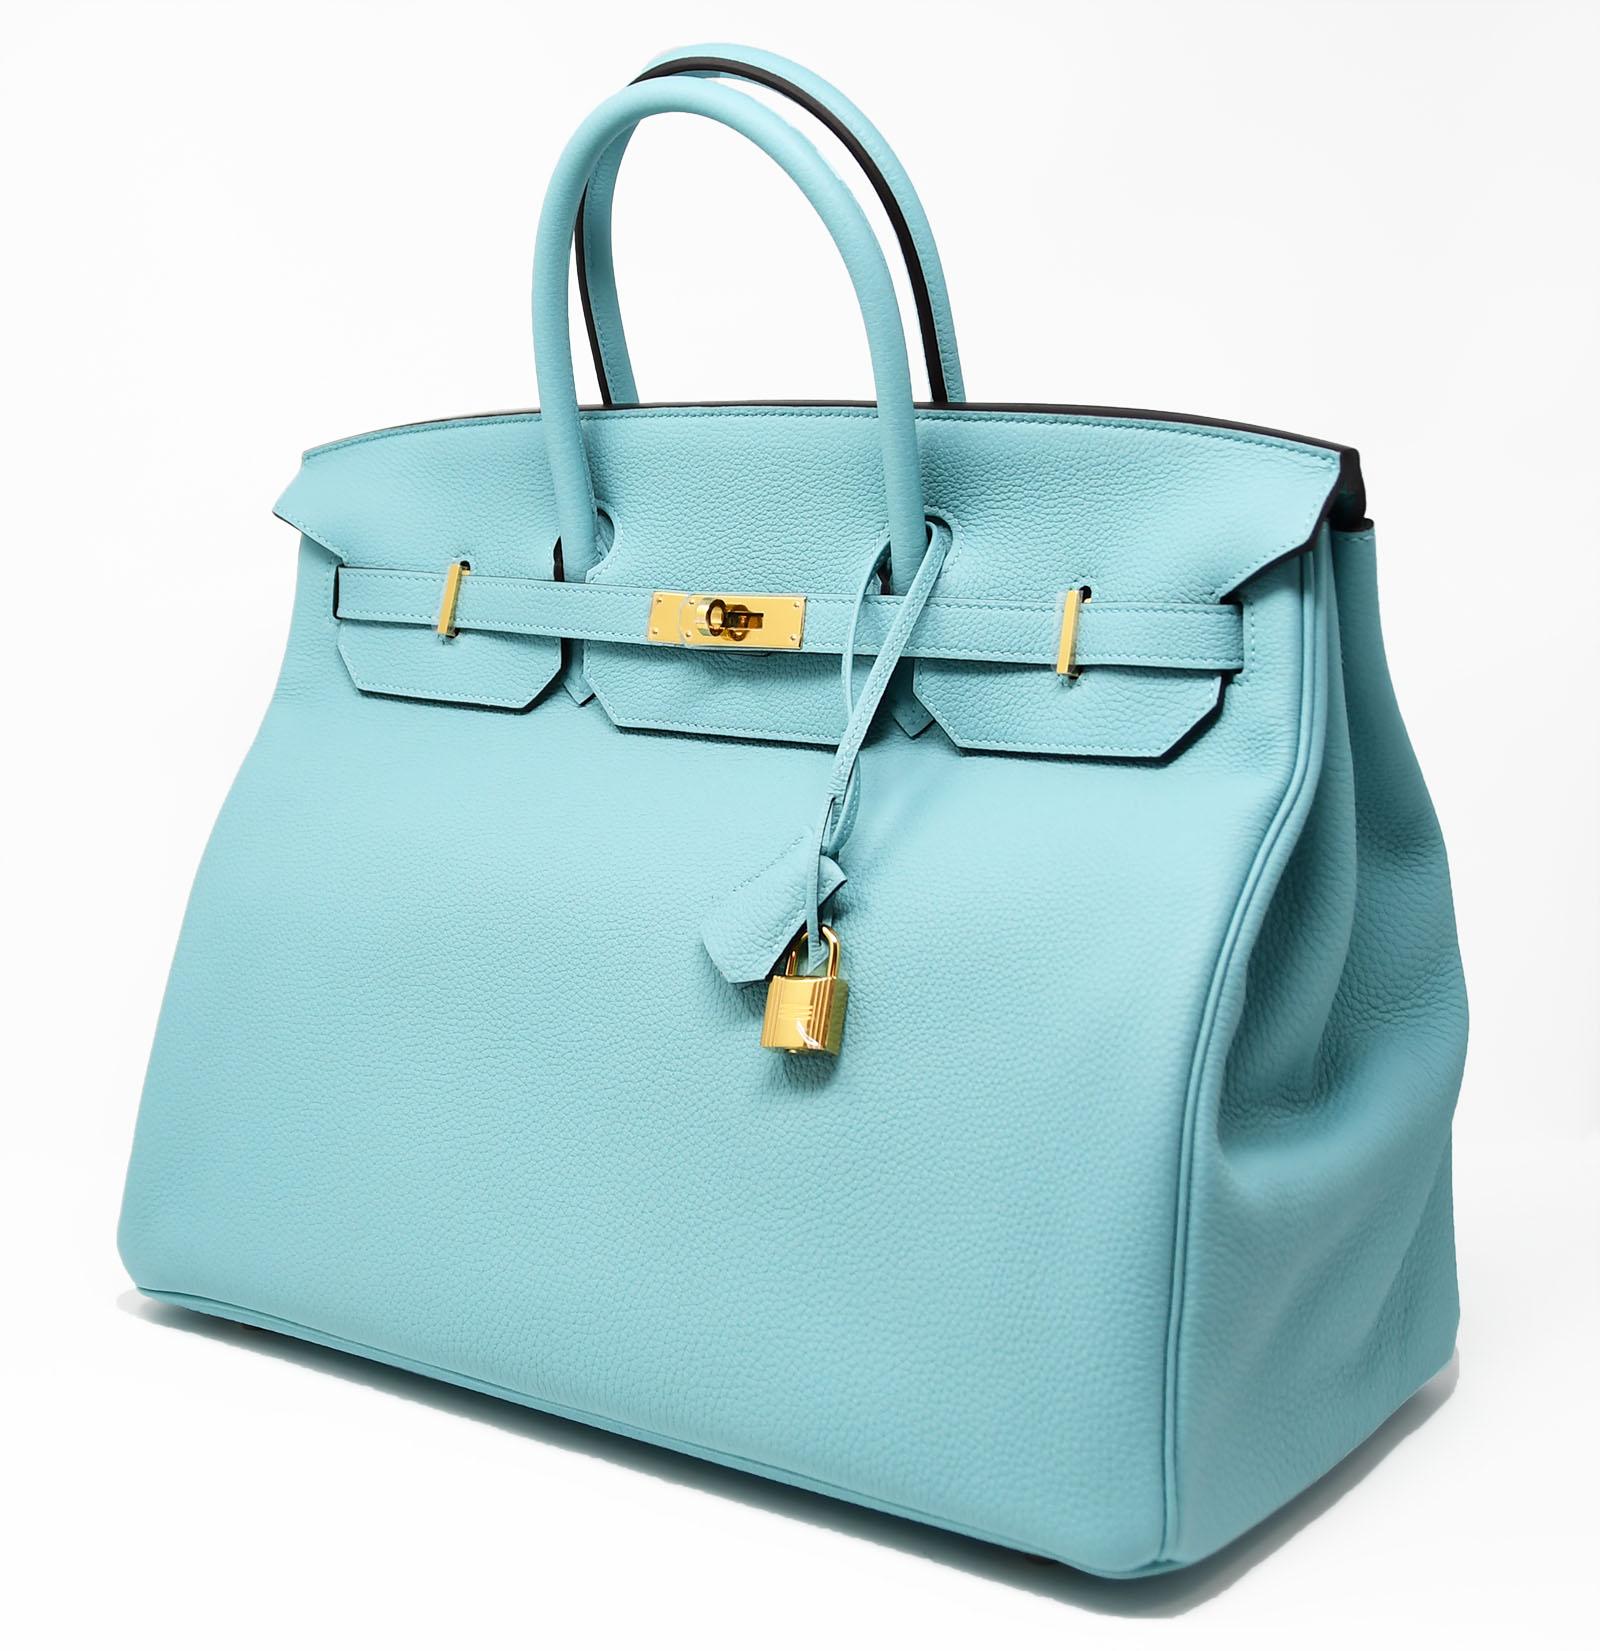 Brand new item, comes with plastic on the hardware, along with the original dust cover and box.  A beautiful light blue 40cm Birkin is the perfect bag for this spring and summer.  New with plastic on the hardware.

Size: 40cm

Condition: New with